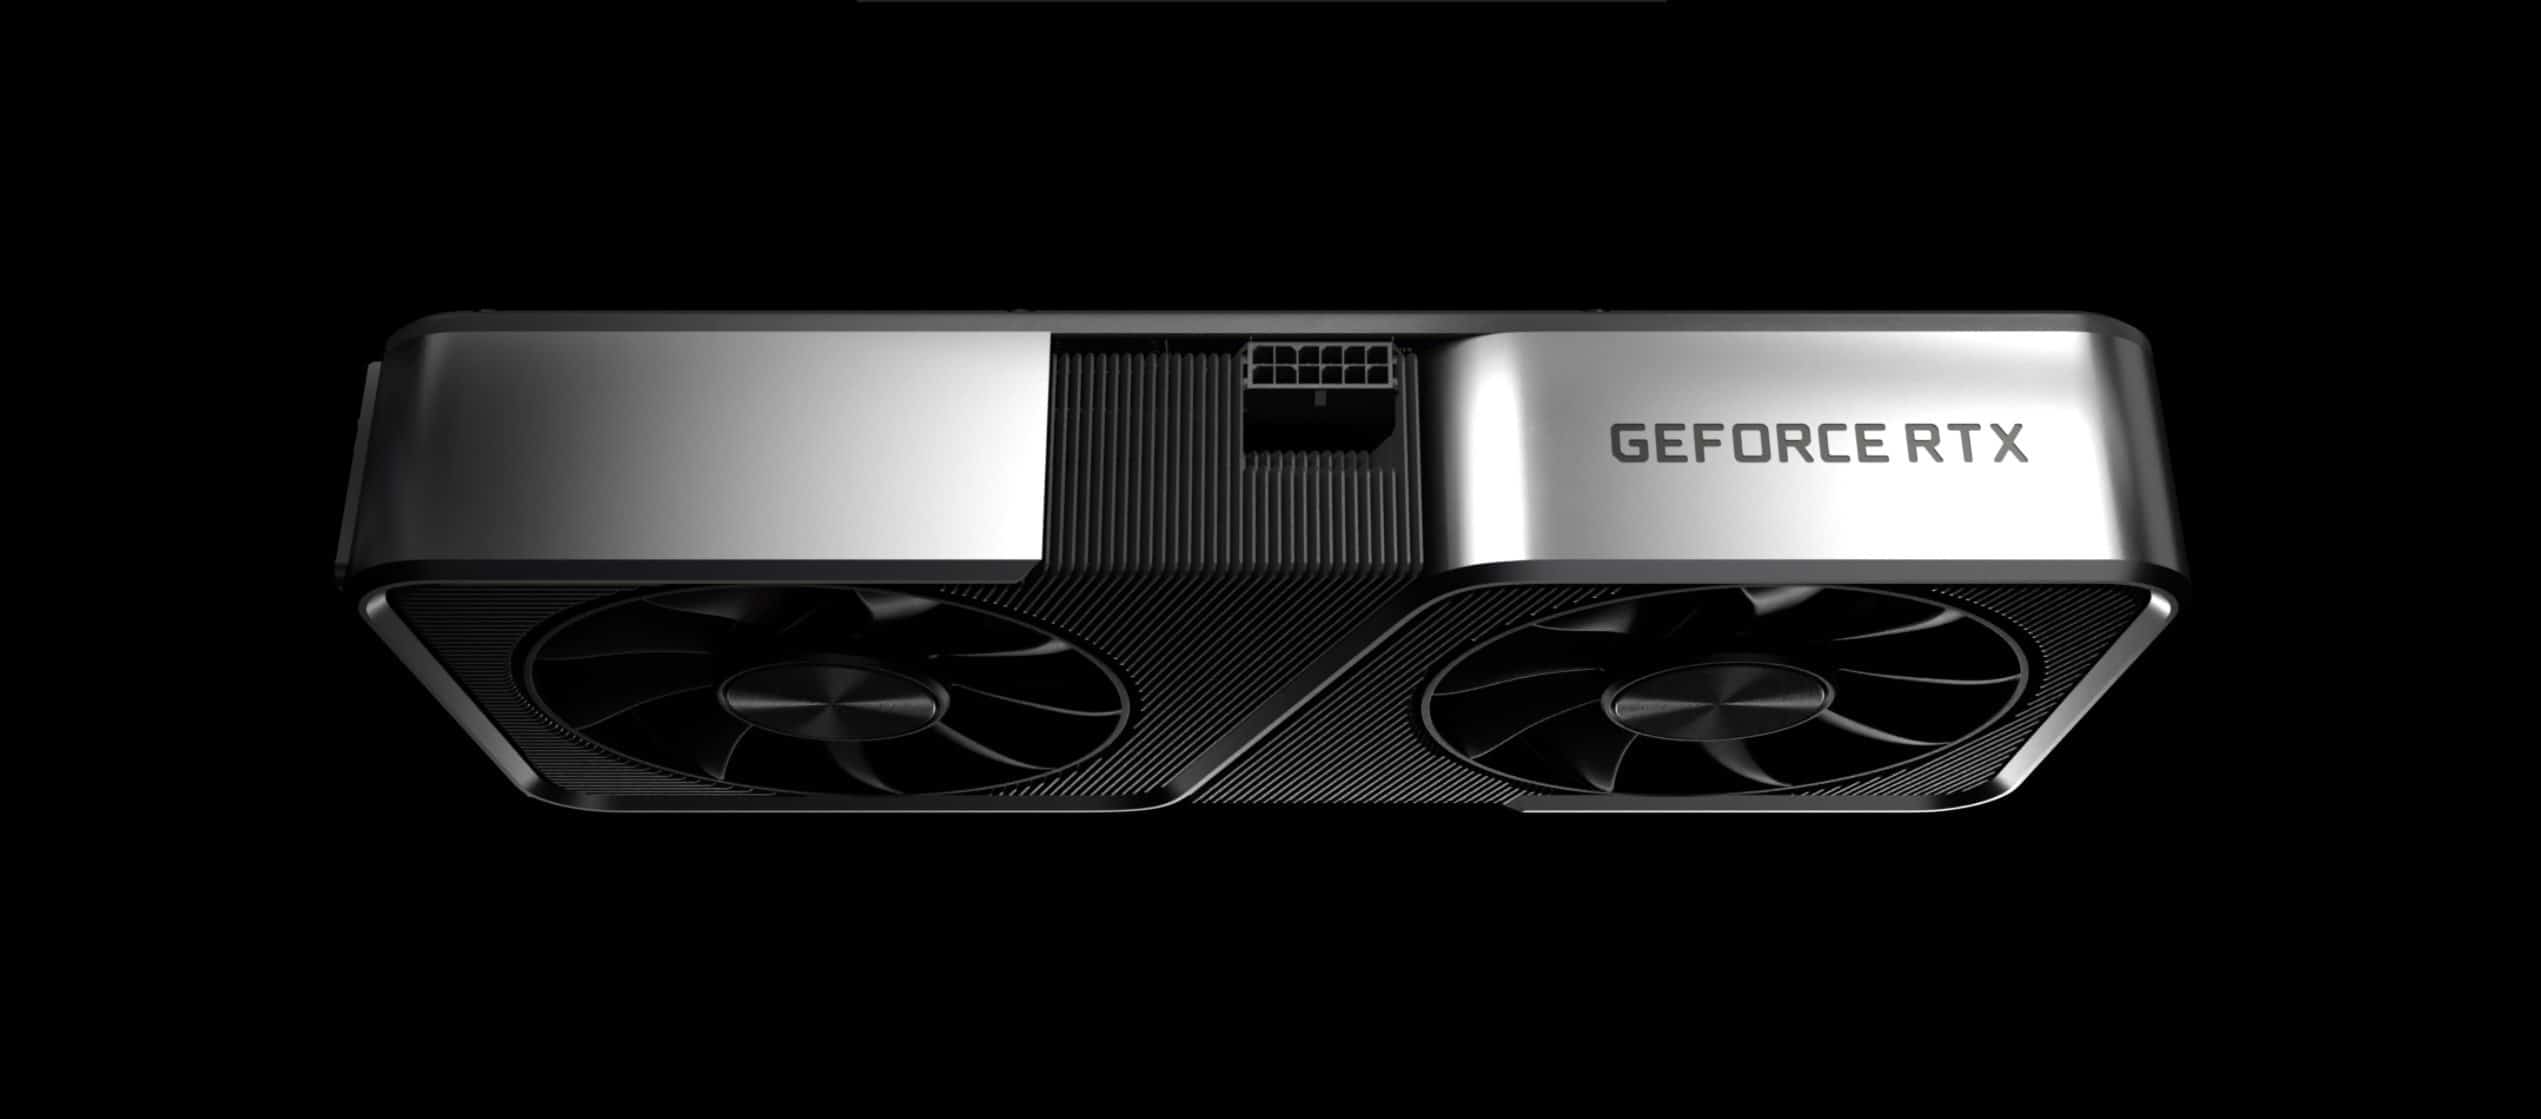 Even NVIDIA has increased the price of its cards.  I'm talking about the GeForce RTX 3000 Founders Edition